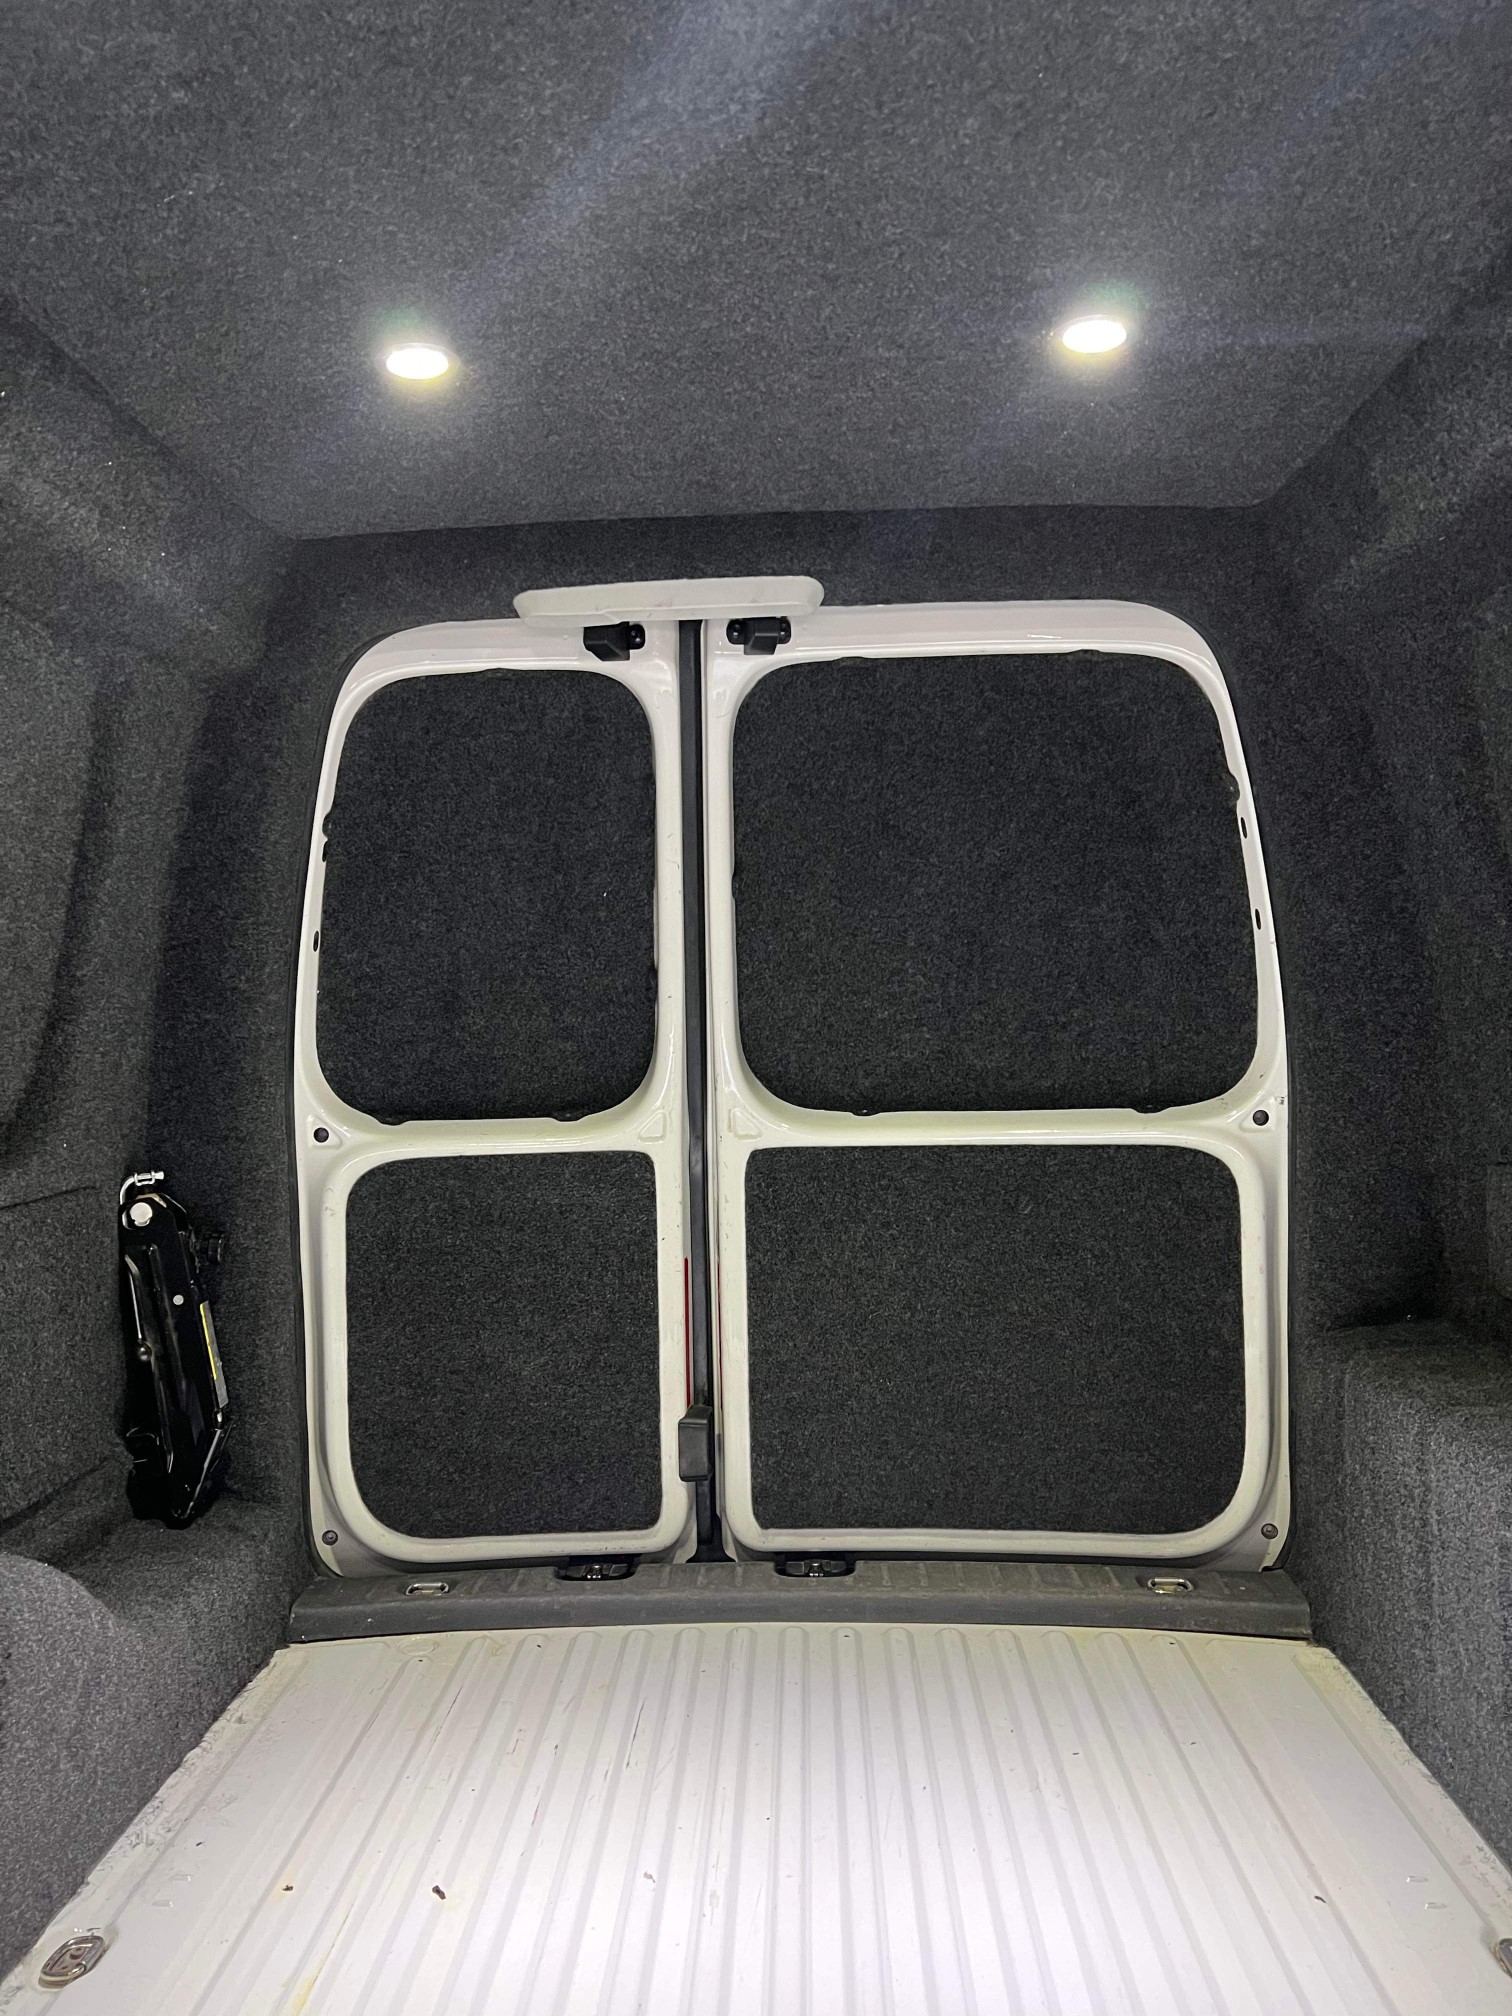 VW Caddy, Windows, insulation, carpet, lights, floor and Altro flooring, fit ( (3)